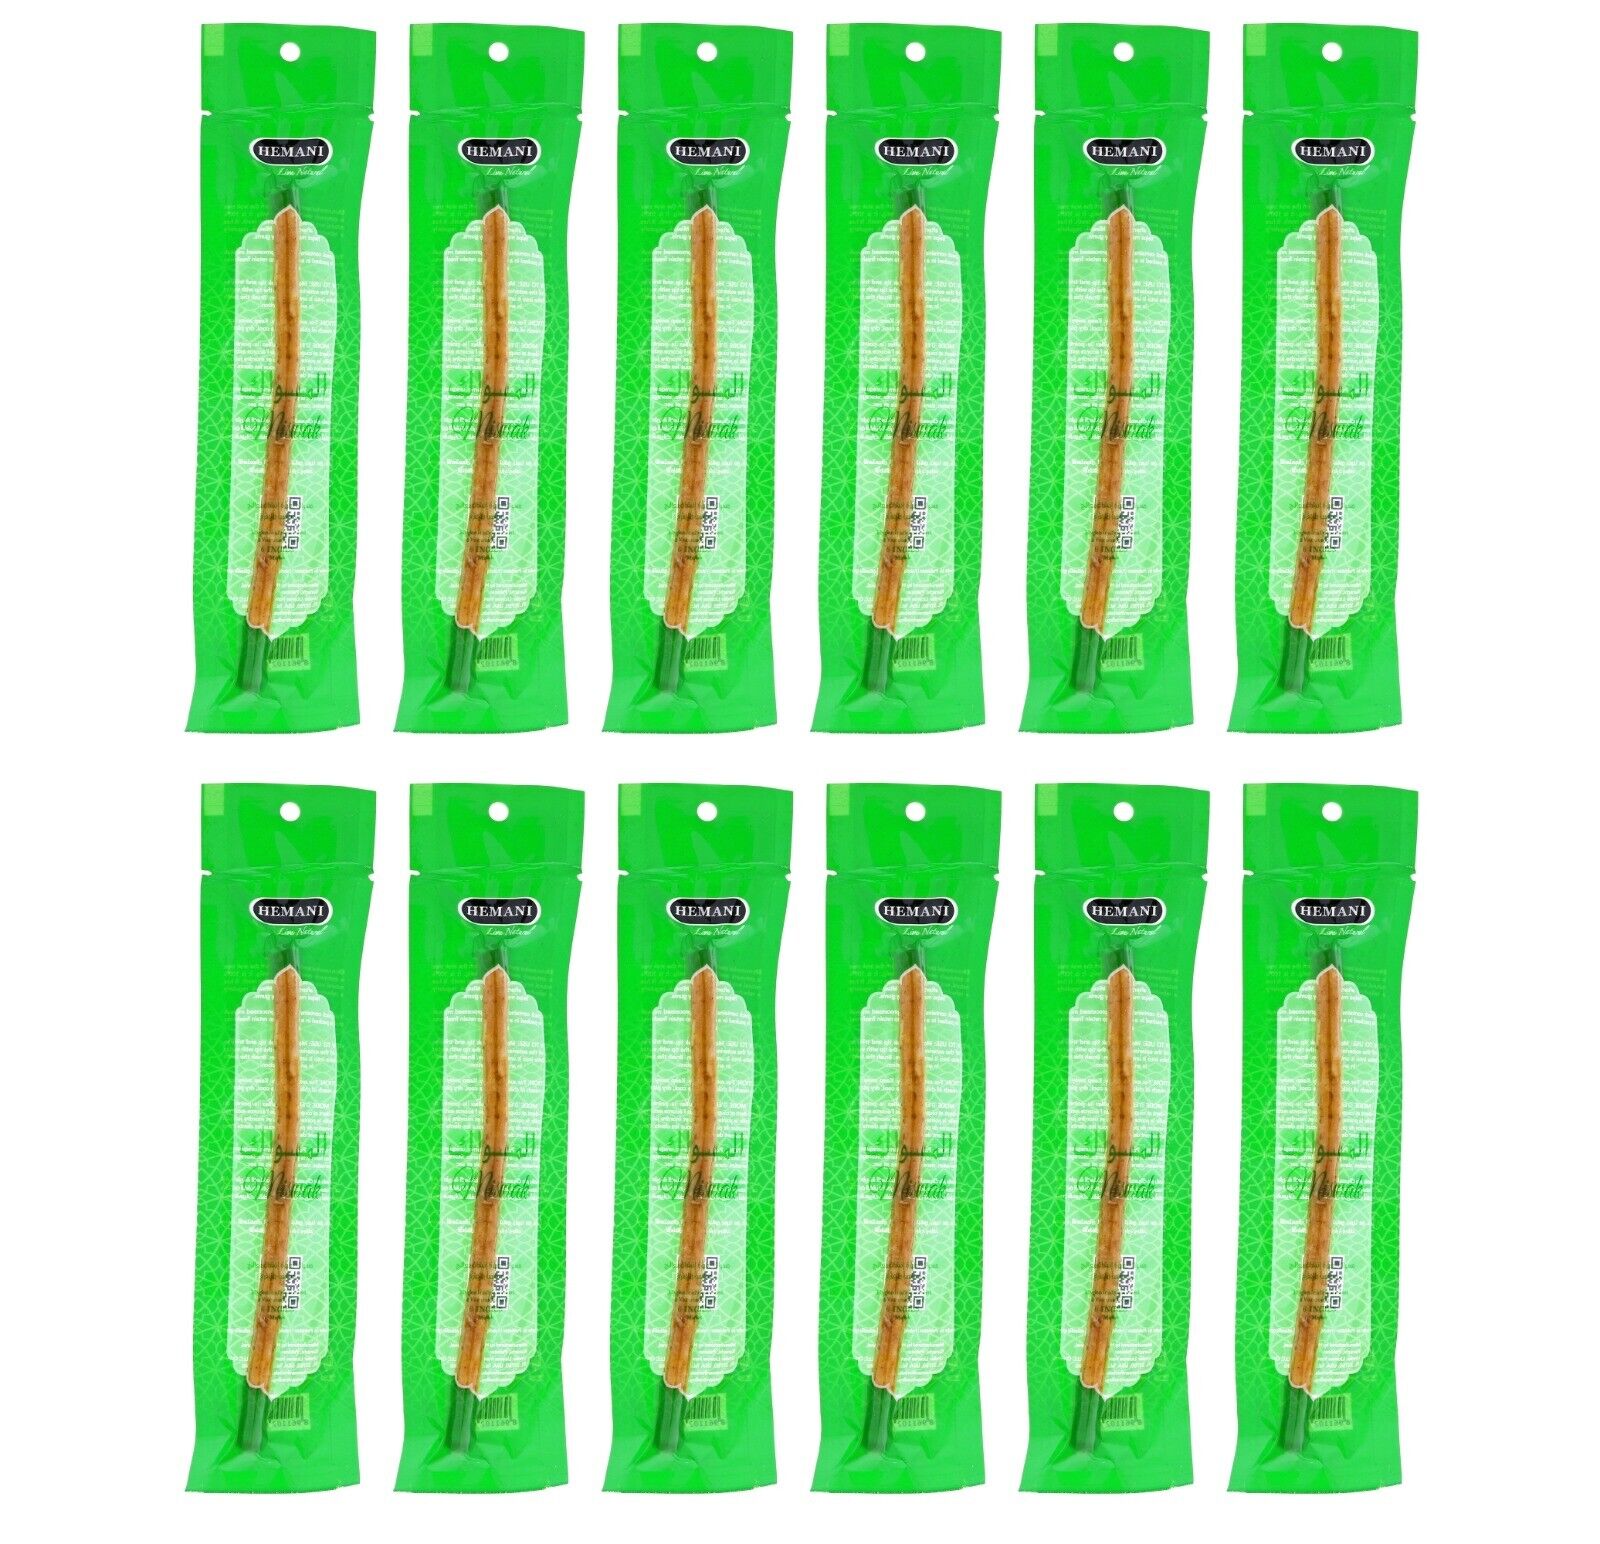 HEMANI Sewak Natural Miswak Stick for Teeth (6 Inches: 12 Pack) Chewing Toothbrush Natural Traditional Toothbrush I AKA Meswak I Sewak I Peelu